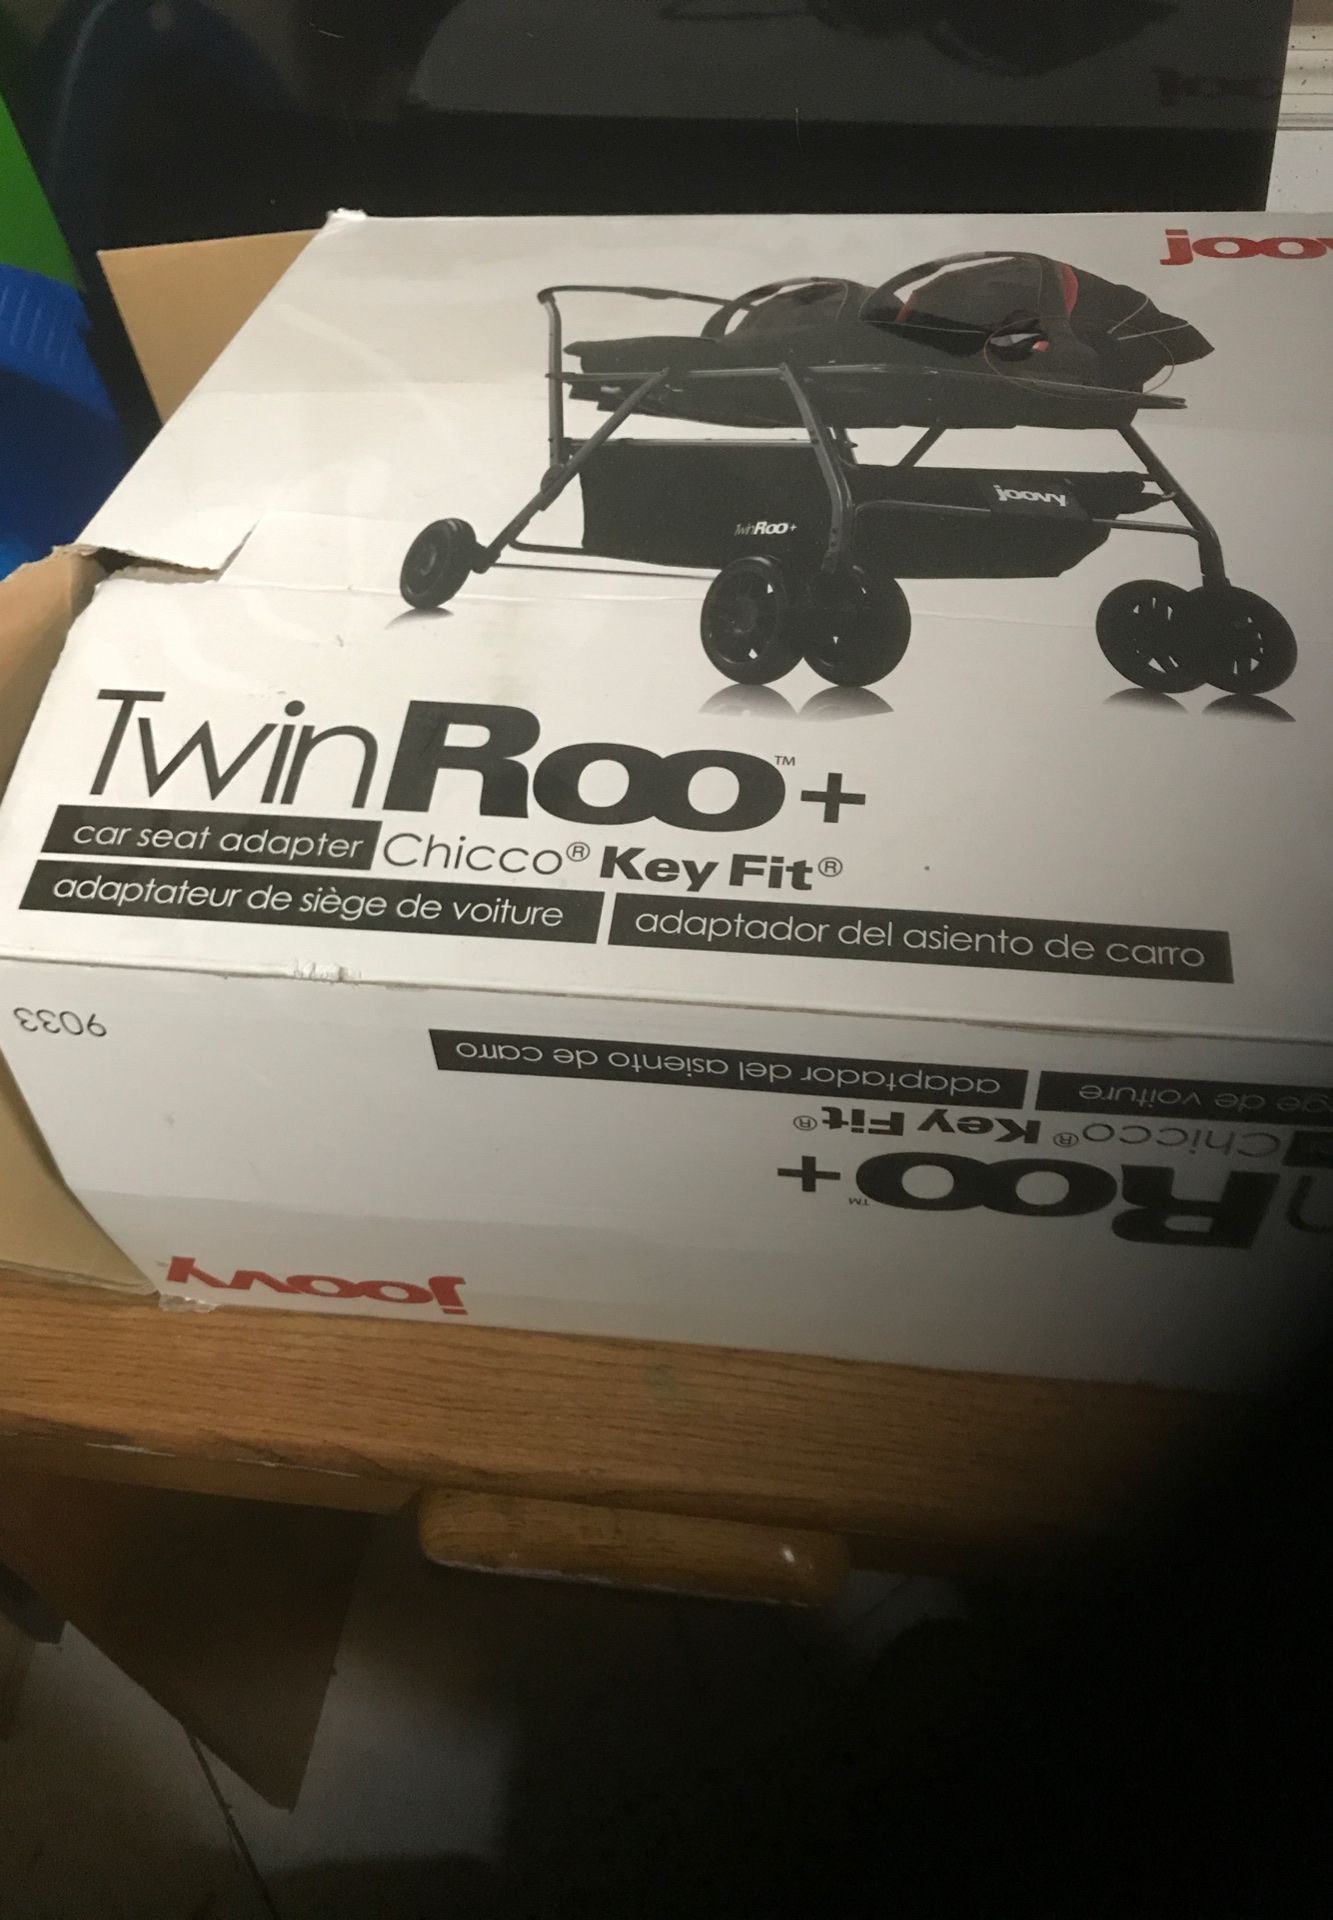 Joovy Twin Roo+ (Graco and Chico Key Fit) Adapter